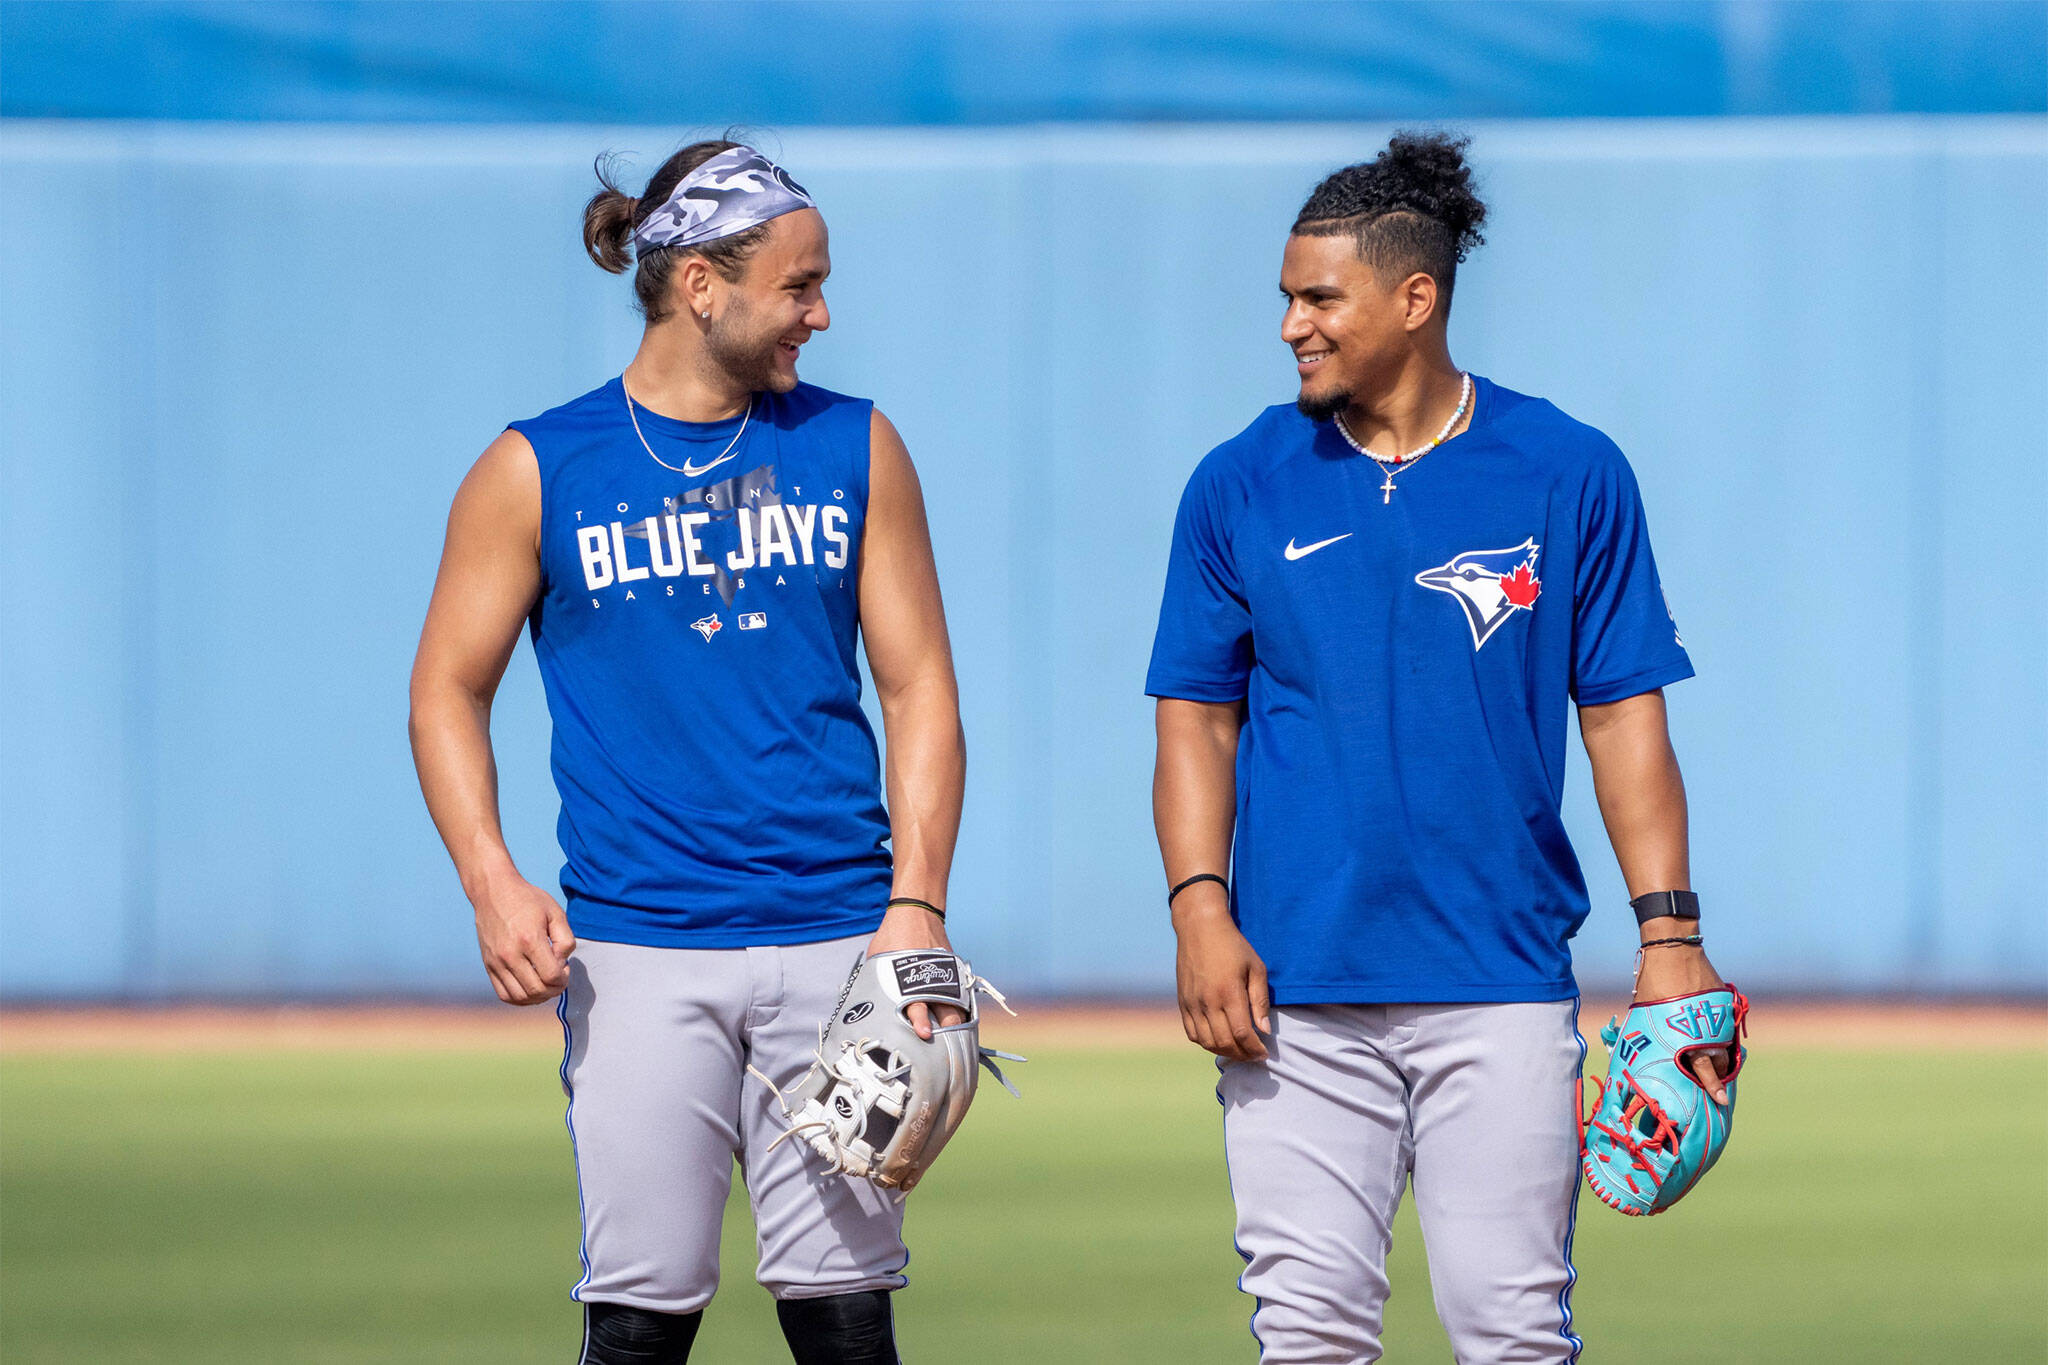 You'll need a special subscription to watch some Blue Jays games